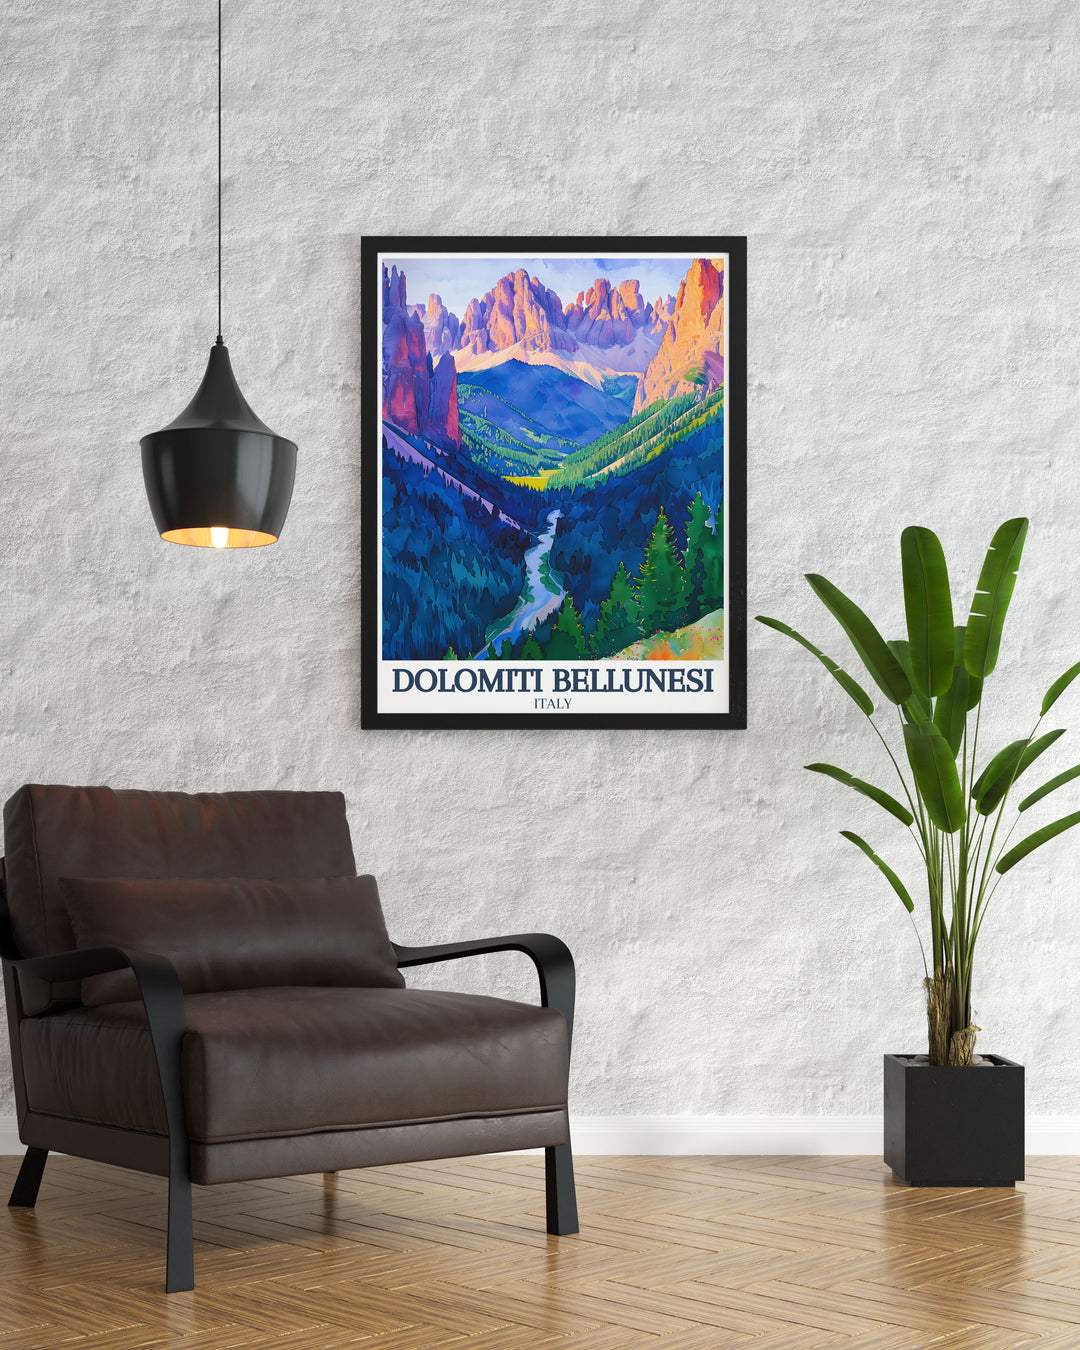 Italy travel poster showcasing the breathtaking landscapes of the Dolomite range bringing the essence of Italys most beautiful national park into your home.